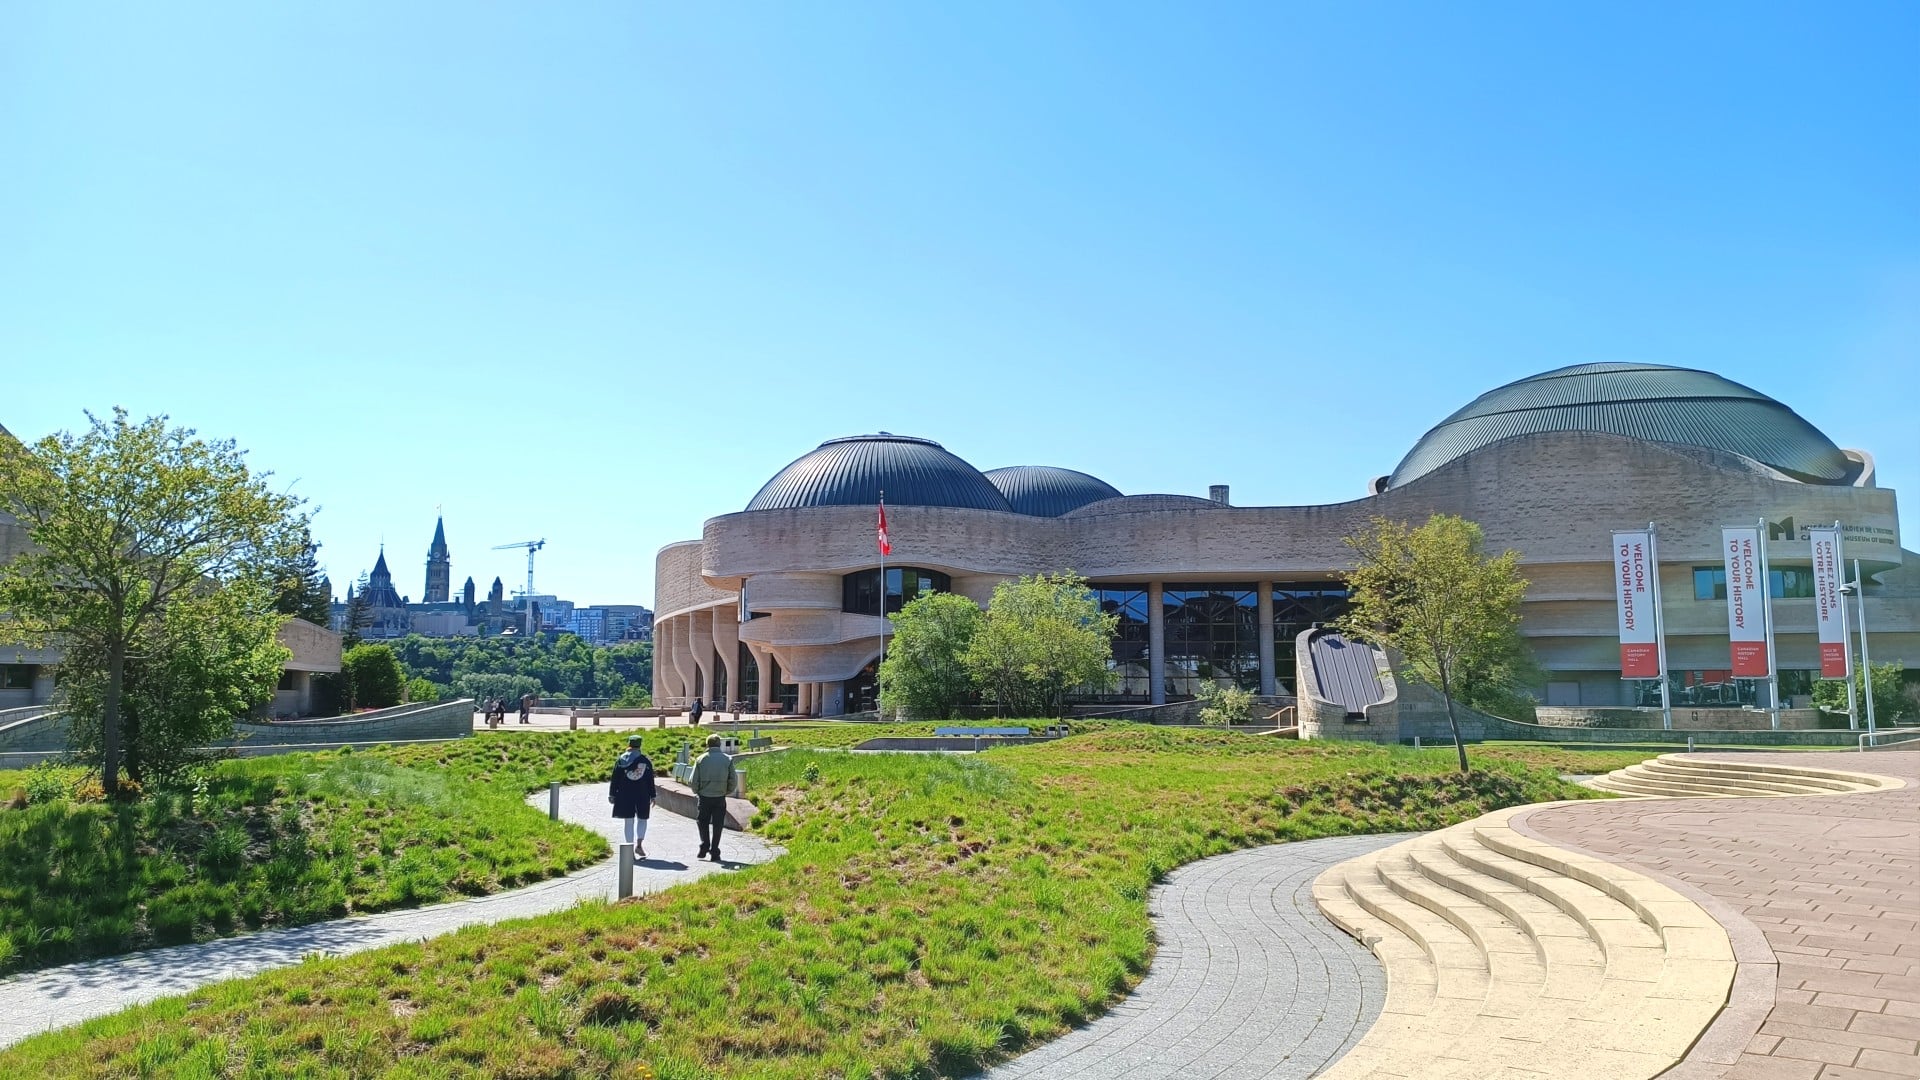 Home to the Canadian Museum of History, Île de Hull (Gatineau) is one of the best areas to stay in Ottawa